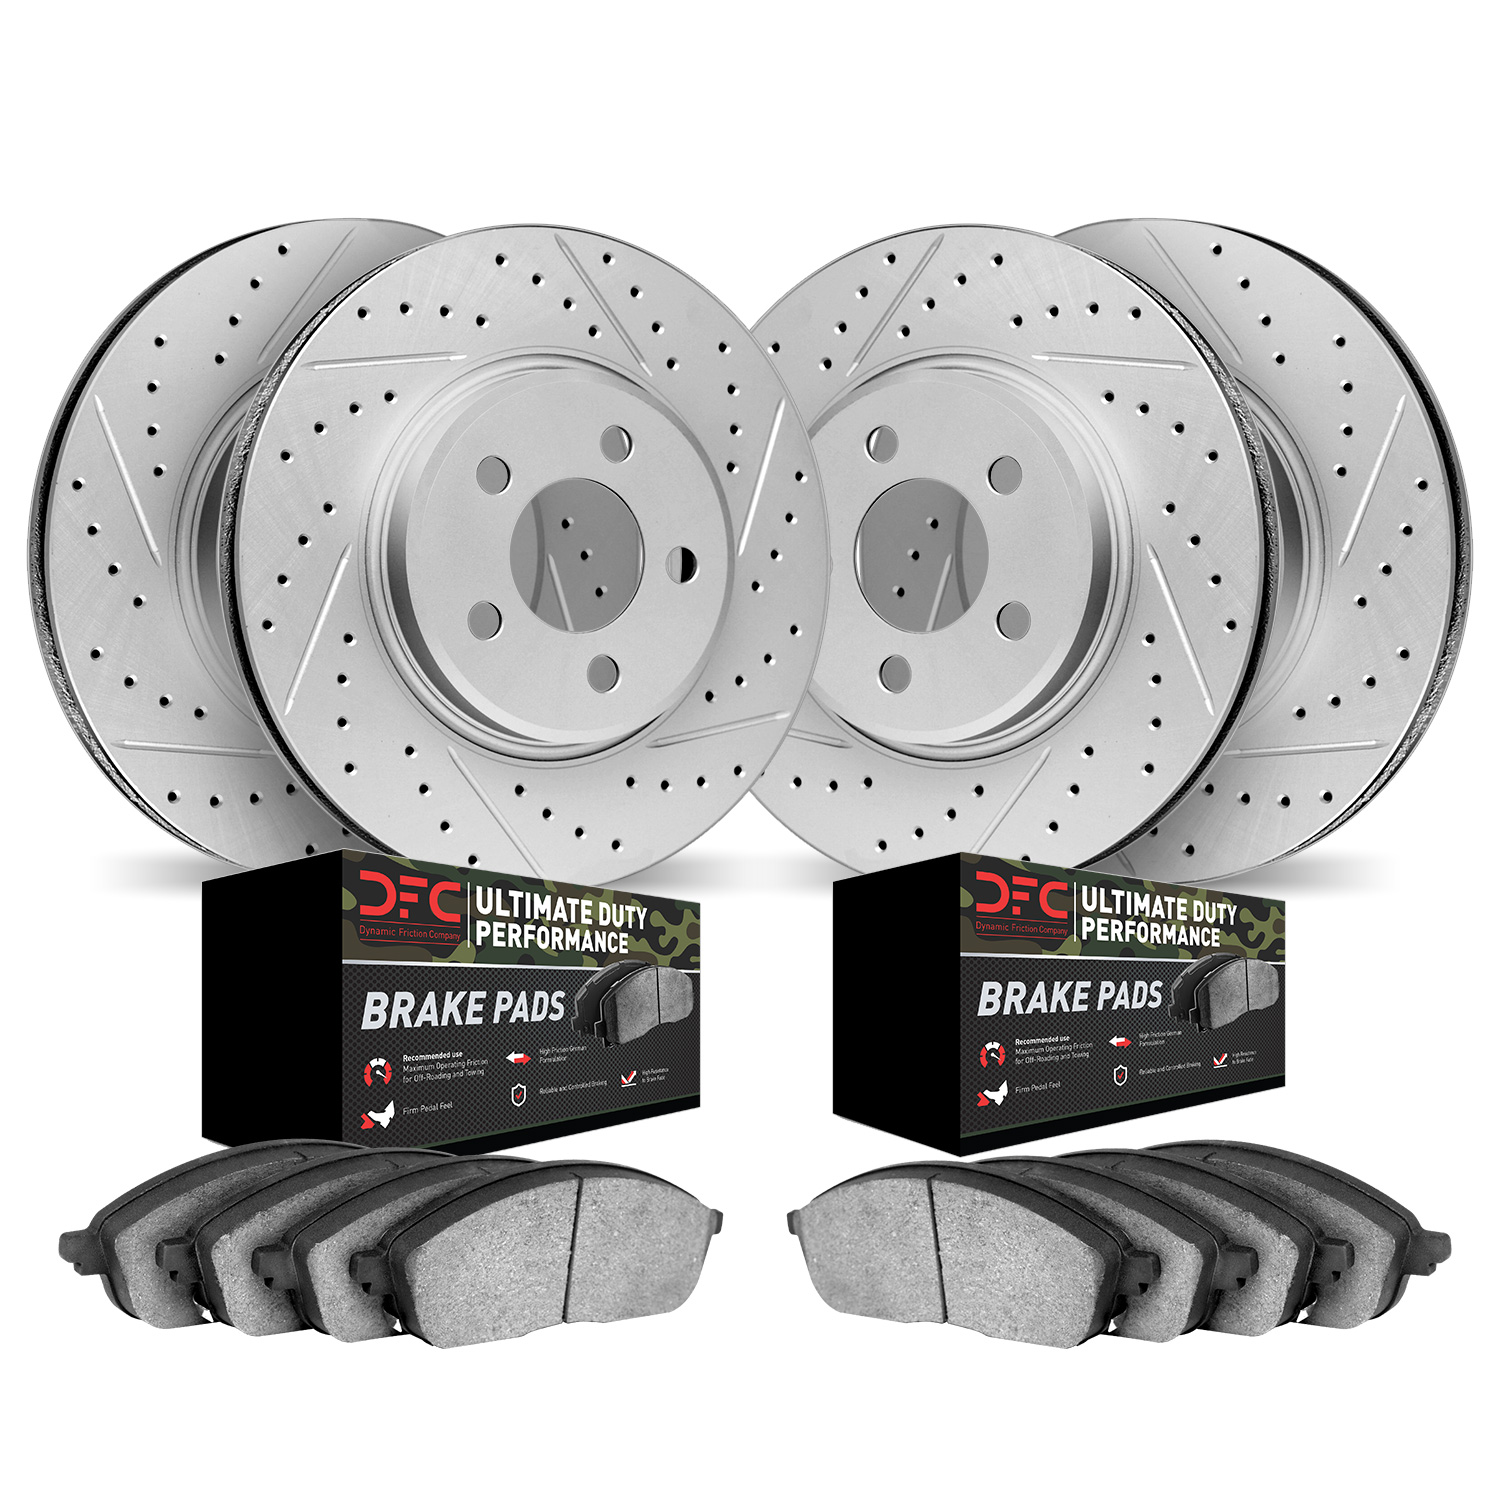 2404-46001 Geoperformance Drilled/Slotted Brake Rotors with Ultimate-Duty Brake Pads Kit, 2009-2015 GM, Position: Front and Rear